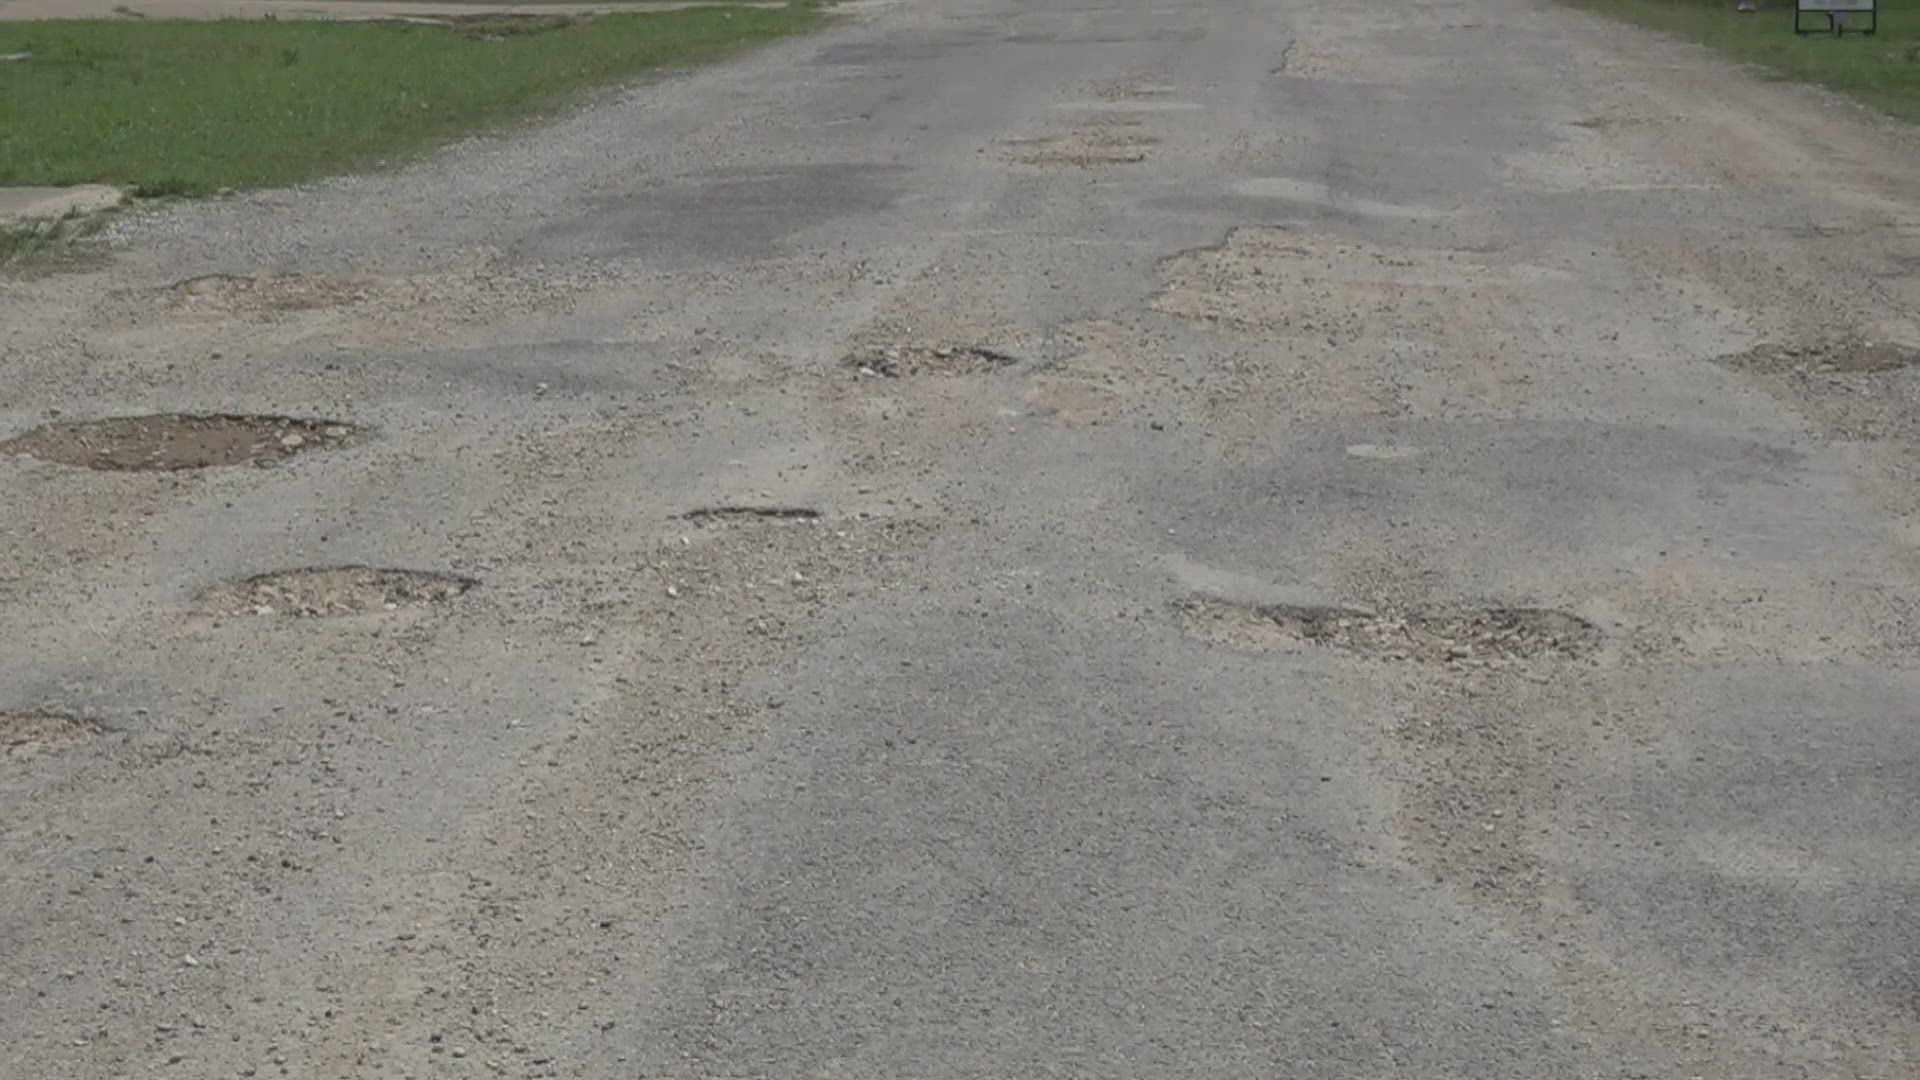 Driving around Robinson hasn't been easy for residents as potholes can be seen and felt on may roads in town.